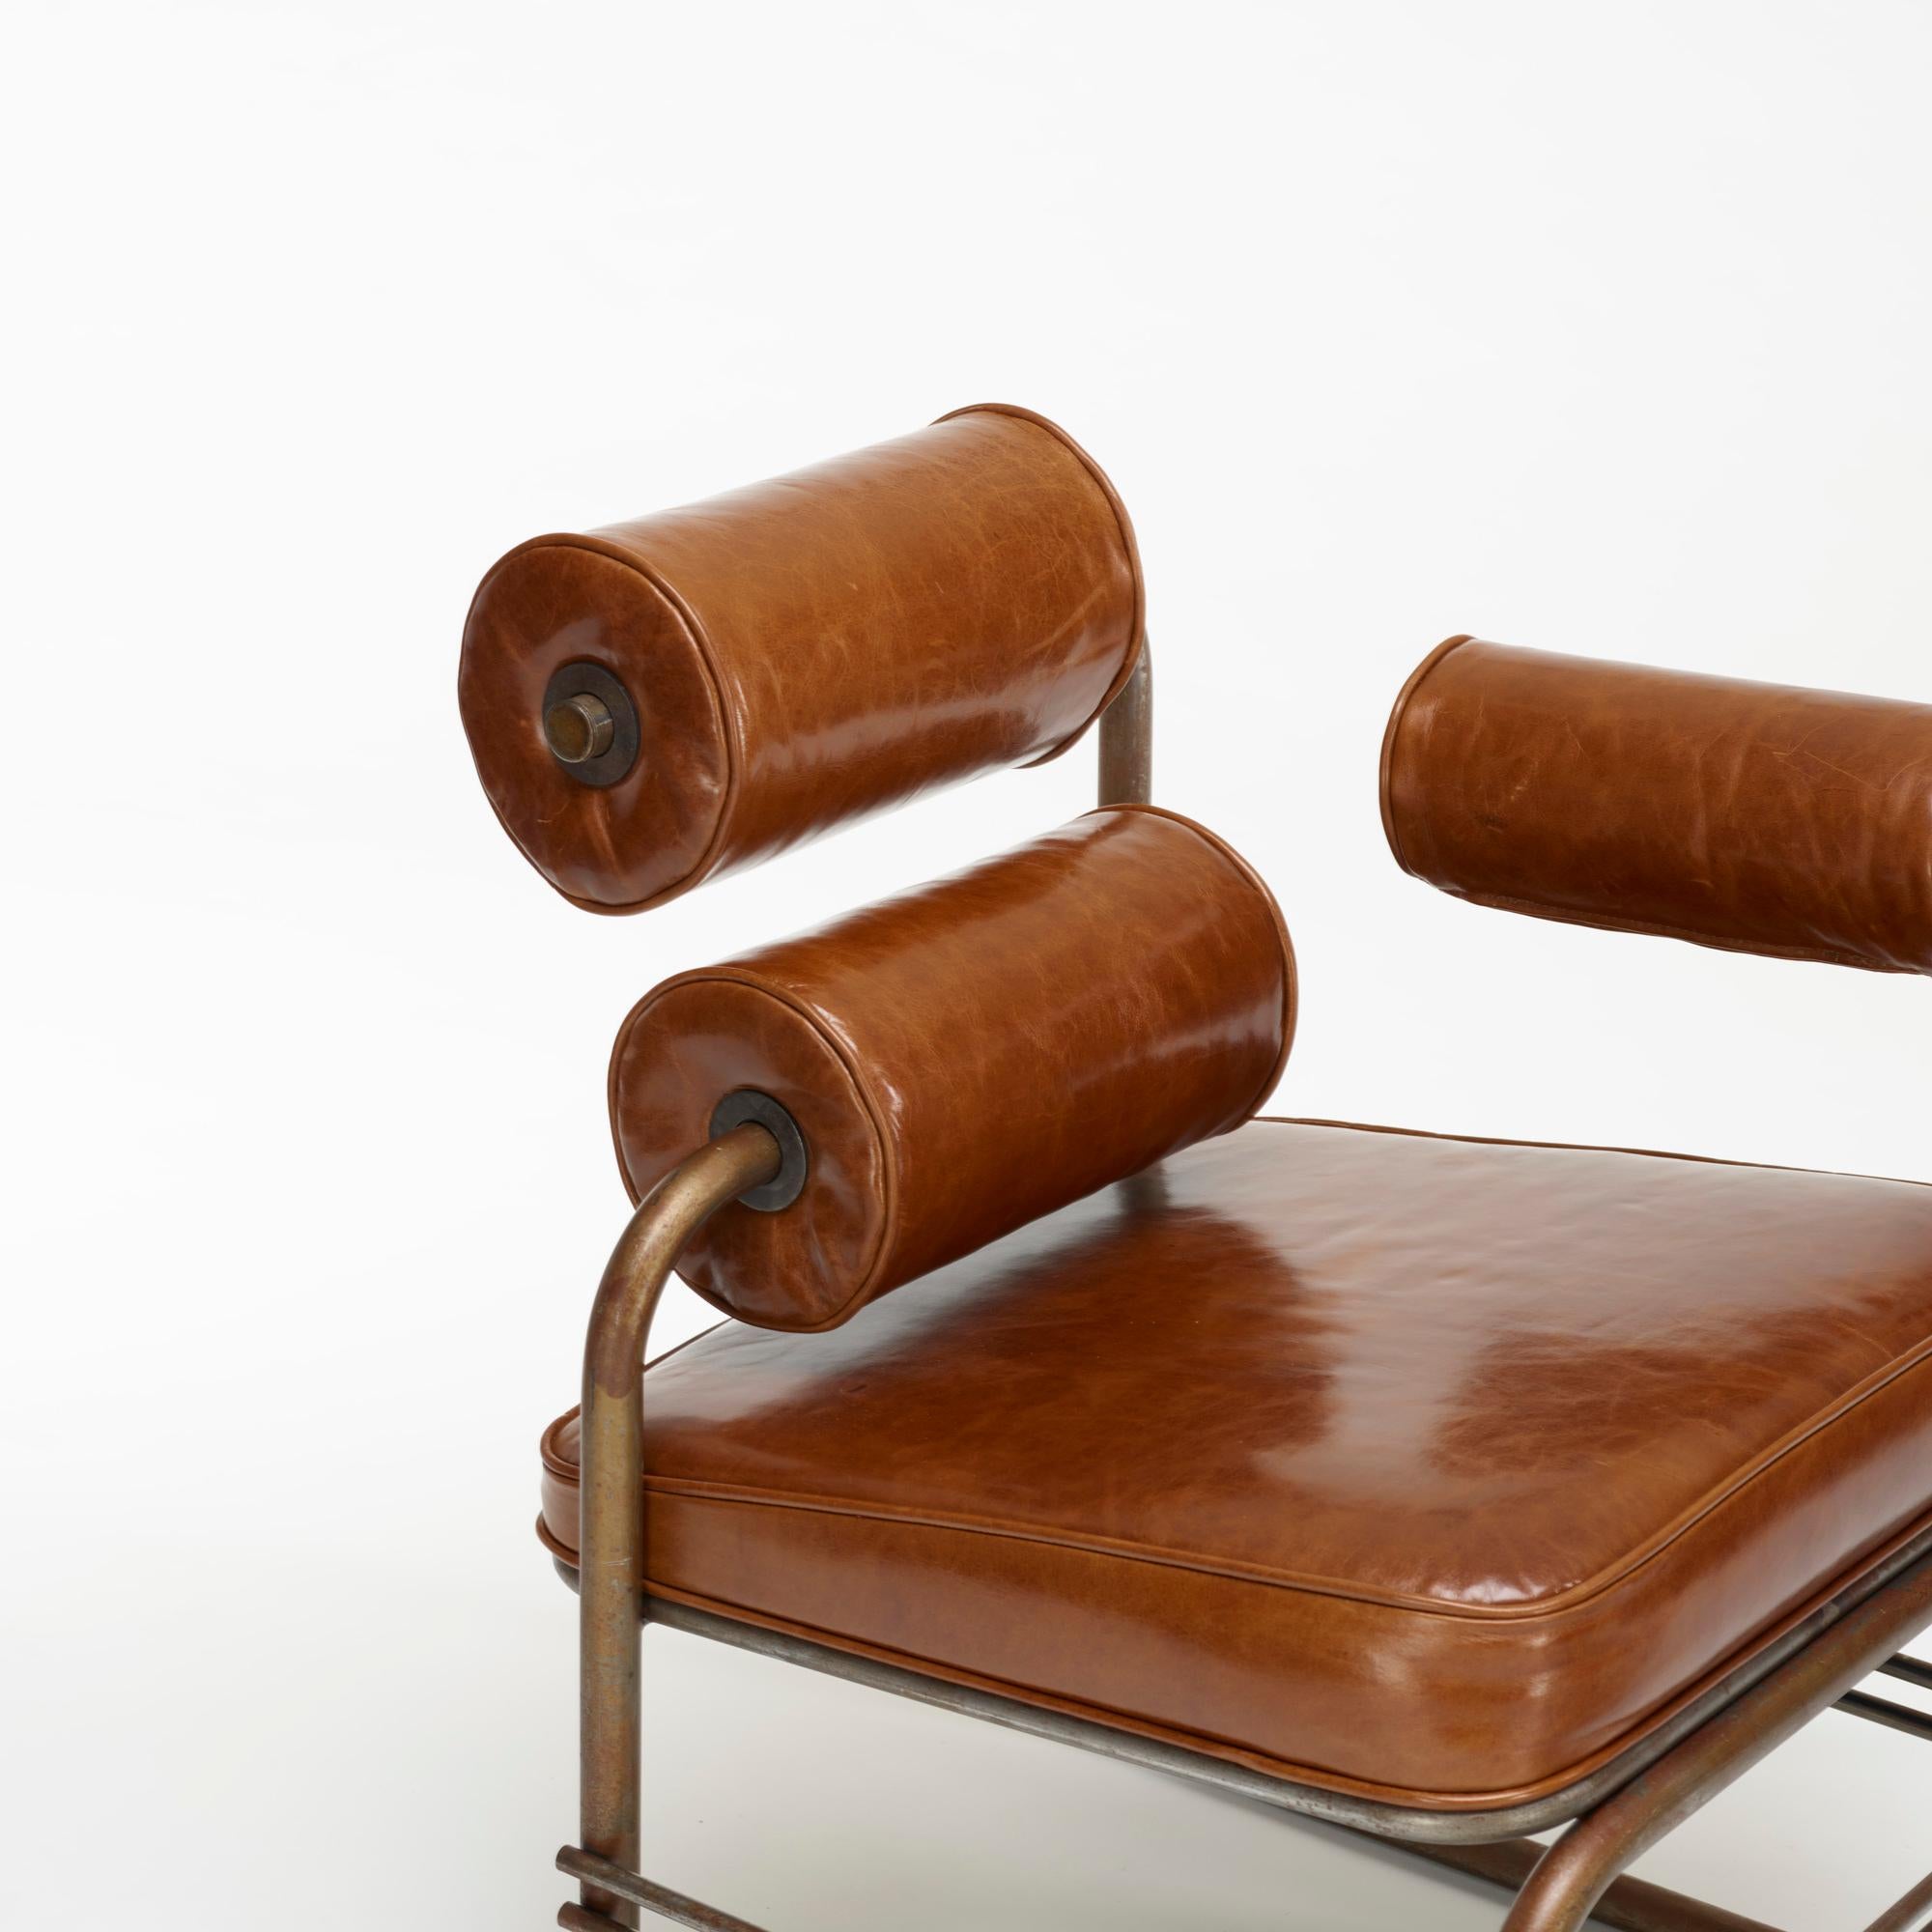 Jordan Mozer (b. 1958), Nautilus One-Armed Steel and Leather Lounge Chair, Created for Sabrina, Chicago, USA 1985/2015. Provenance: collection of the artist. Signed. 27” deep x 24.5” wide x 30 .75 tall, 17” seat (68.6 cm deep x 62 cm wide x 78 cm